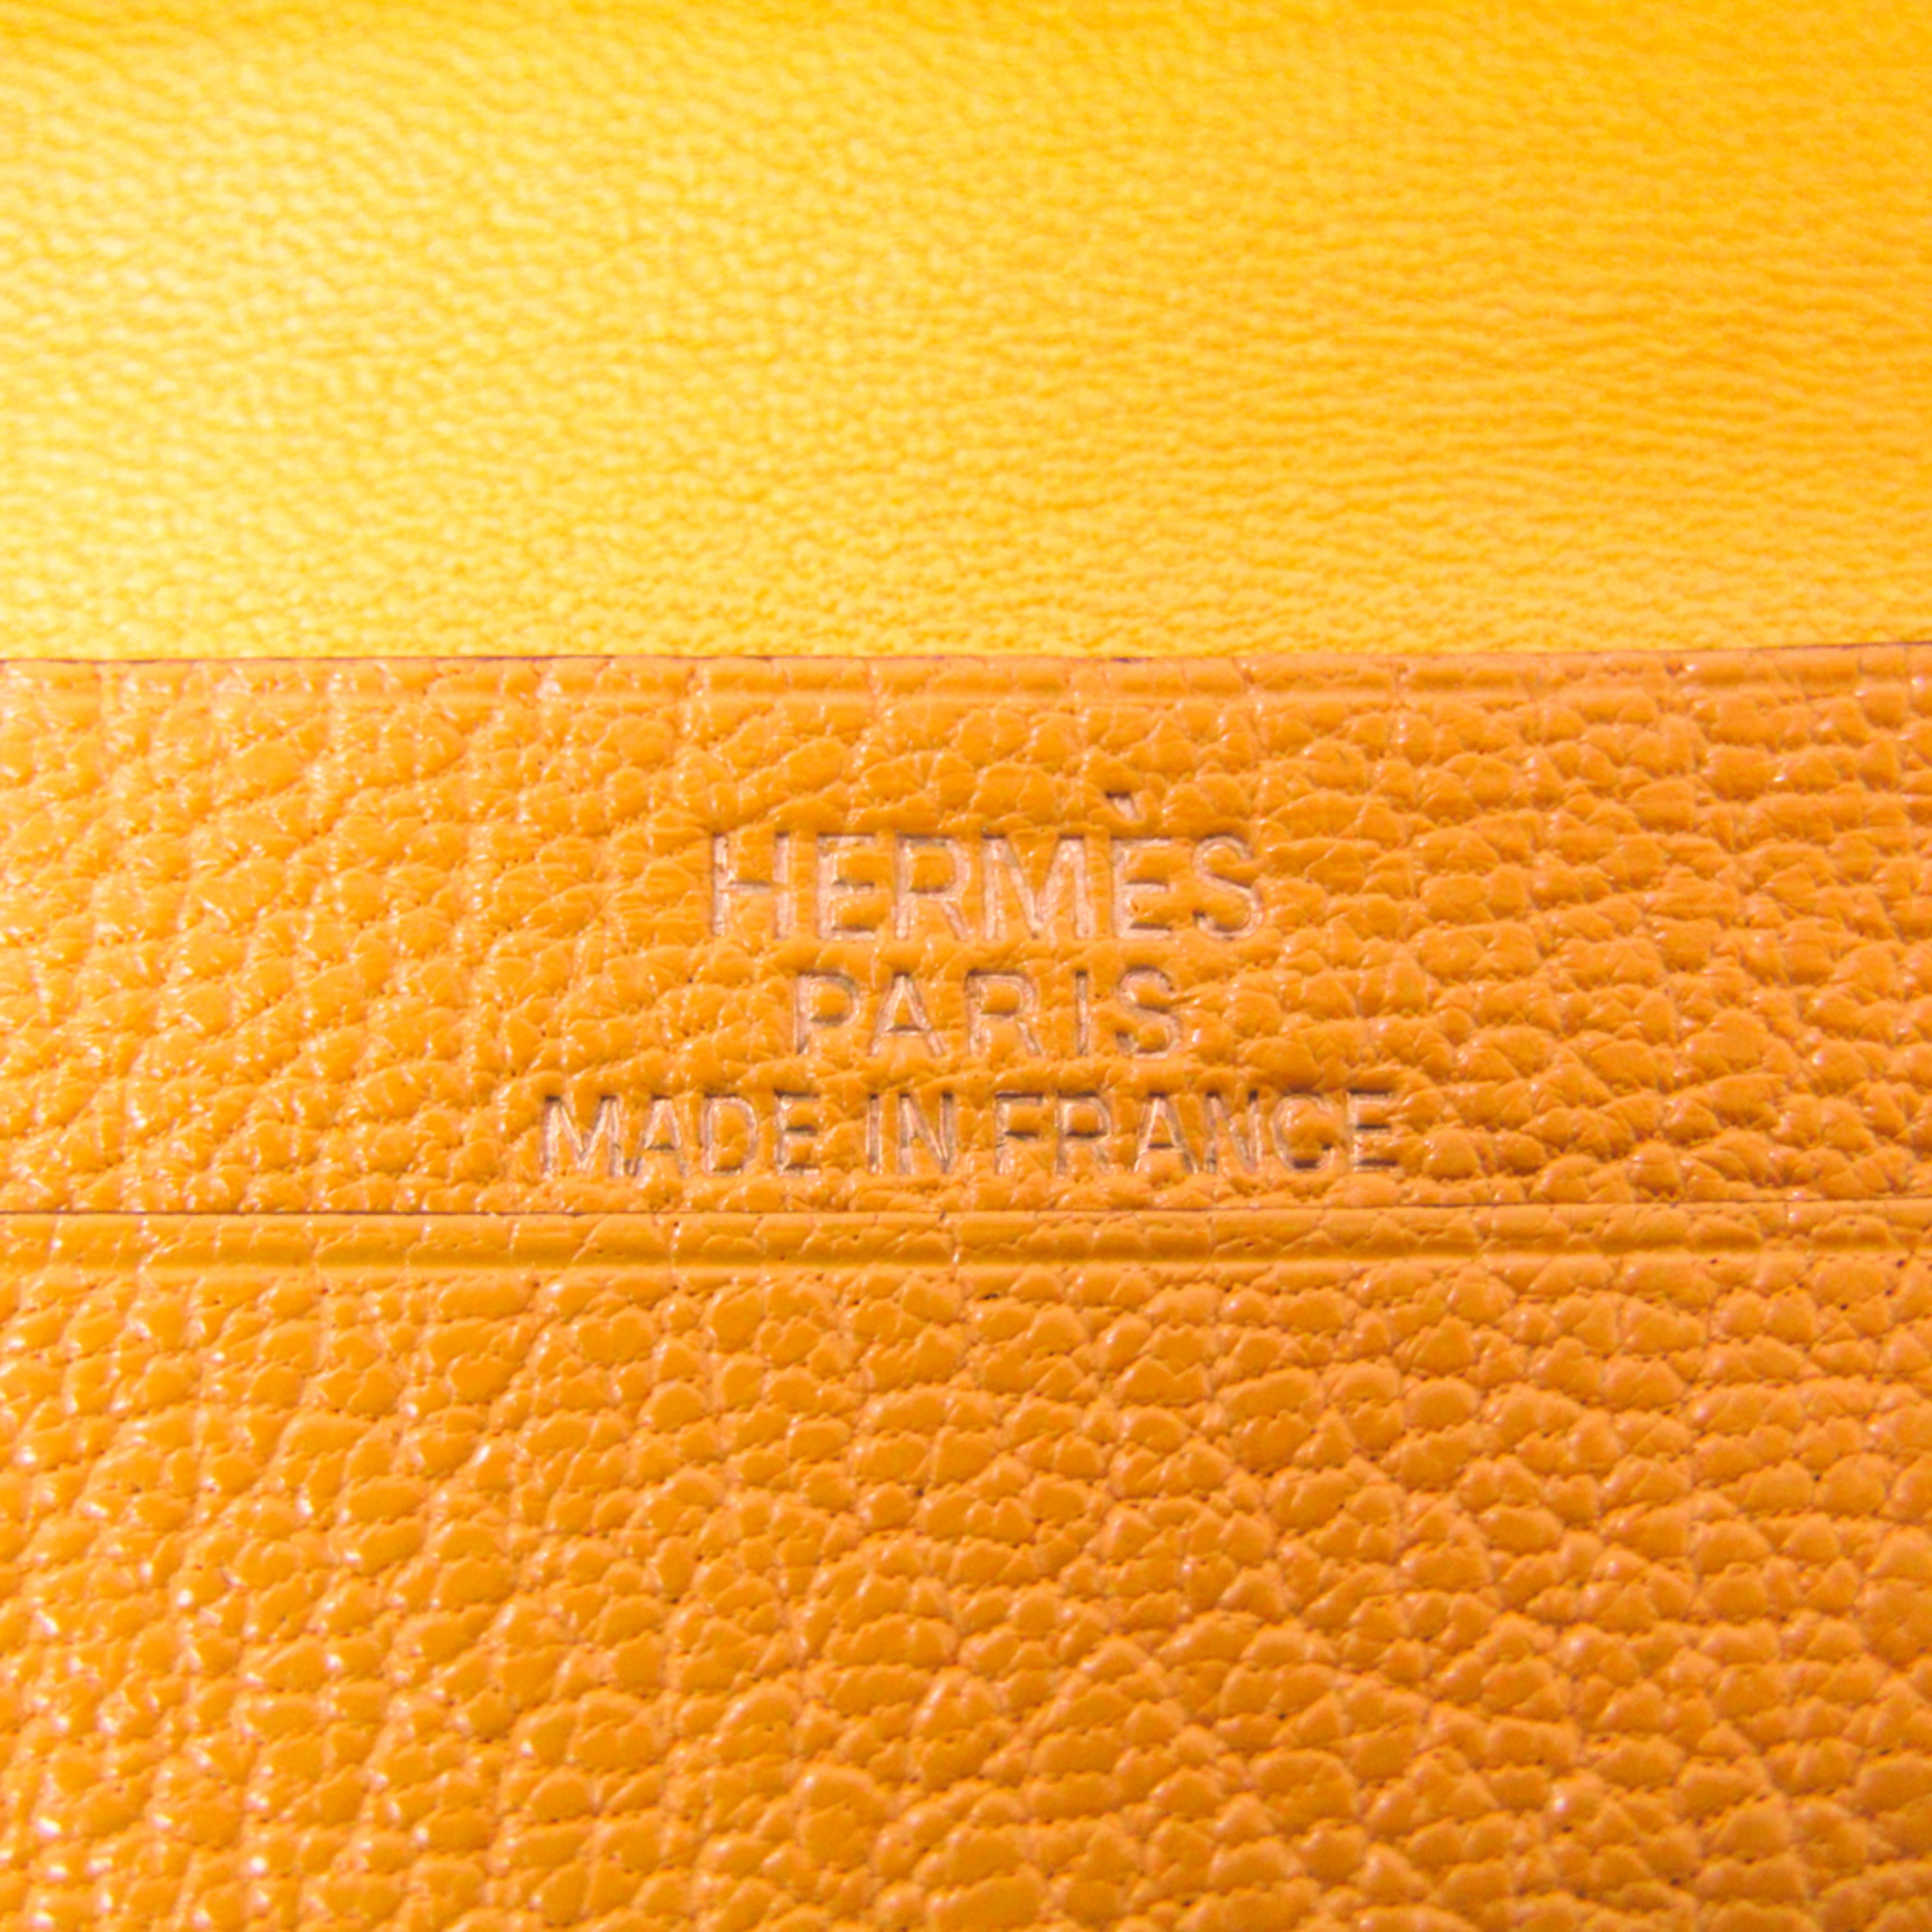 Hermes Bearn Chevre Myzore Leather Business Card Case Yellow